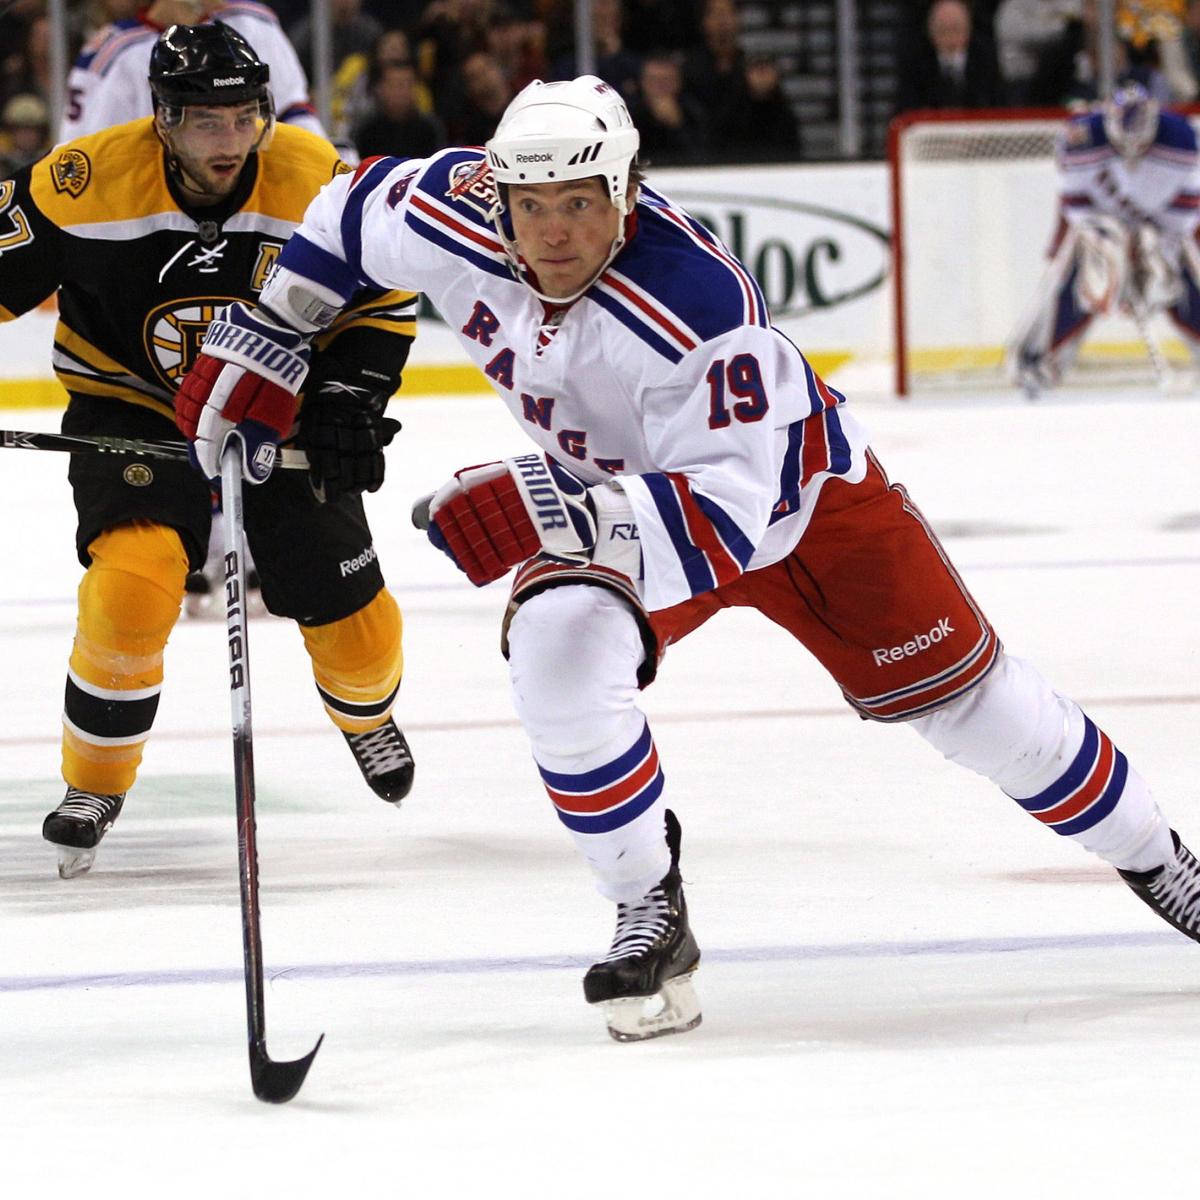 Rangers vs Bruins Blueshirts Win in Overtime, Prove They're Best Team